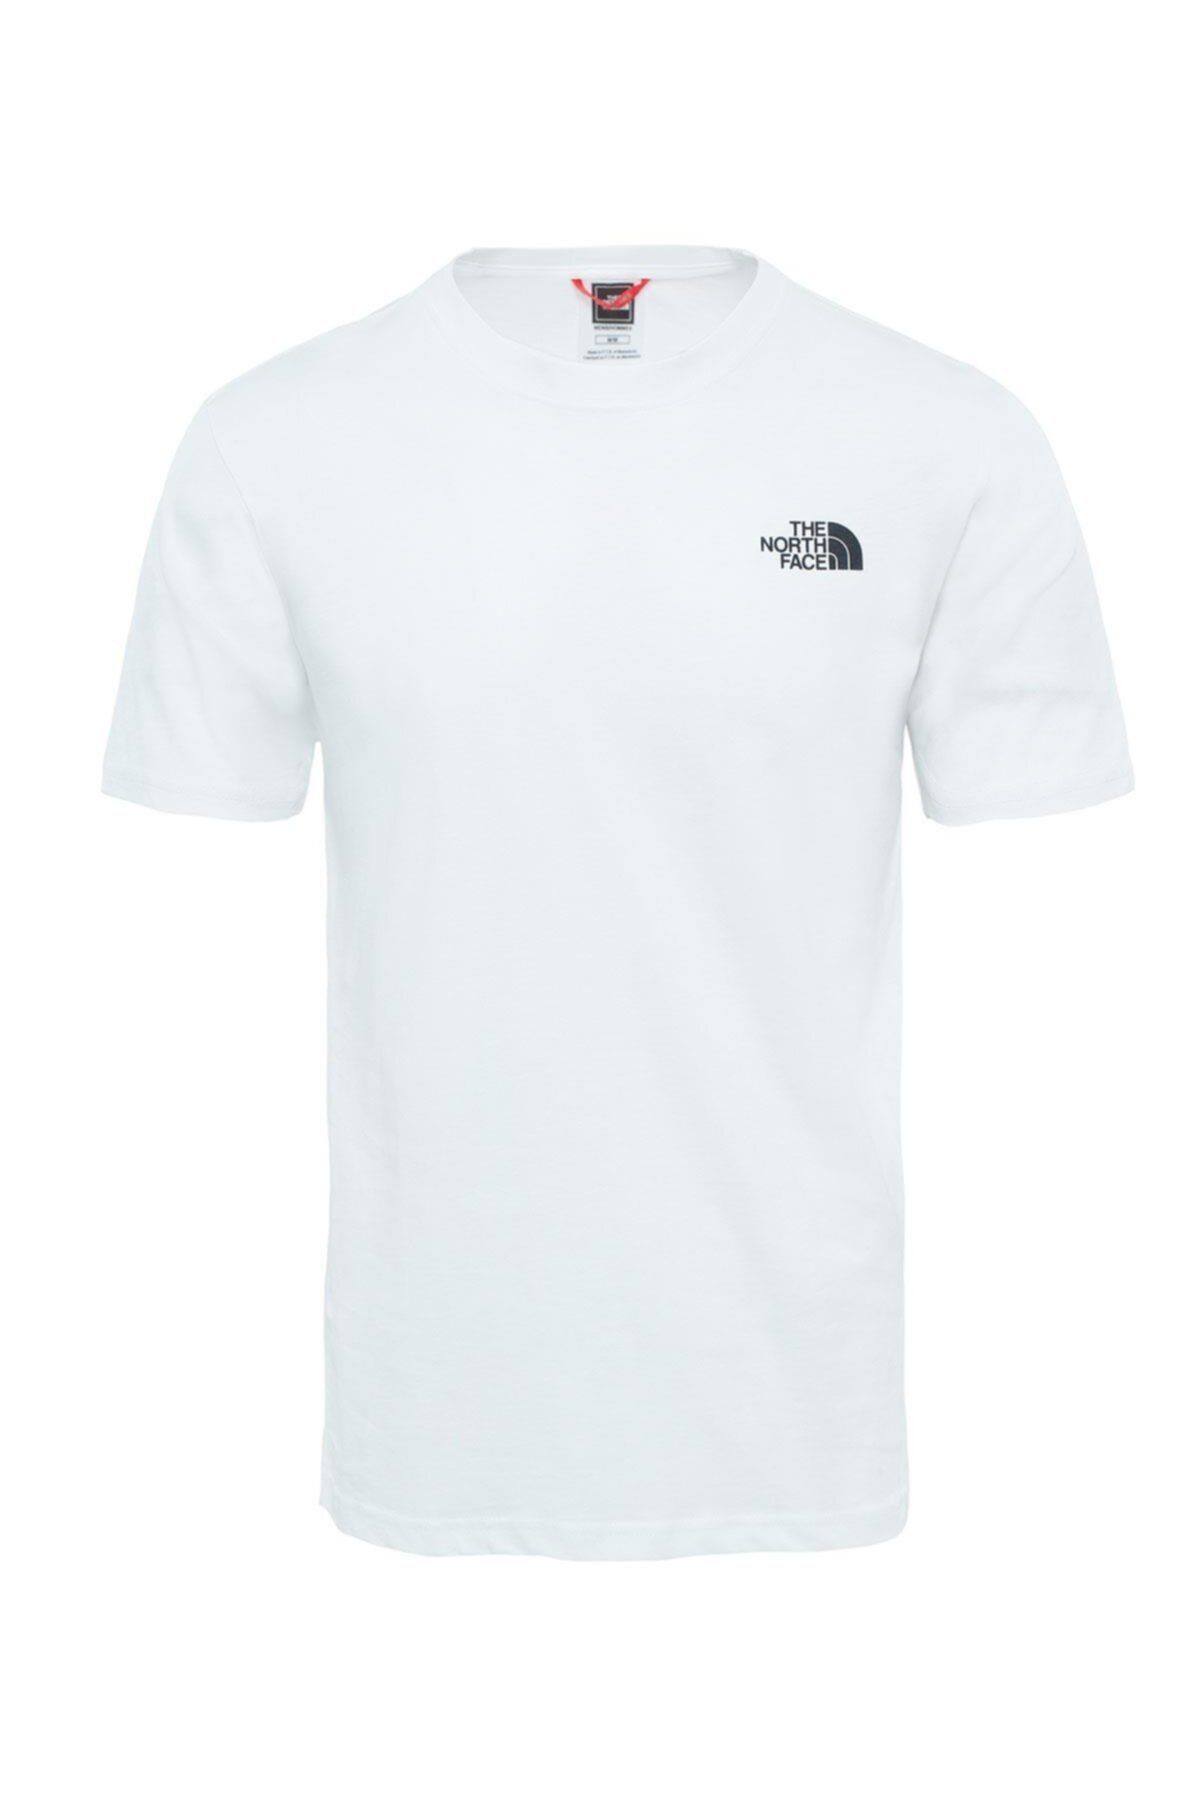 The North Face Red Box Tee Beyaz T-shirt